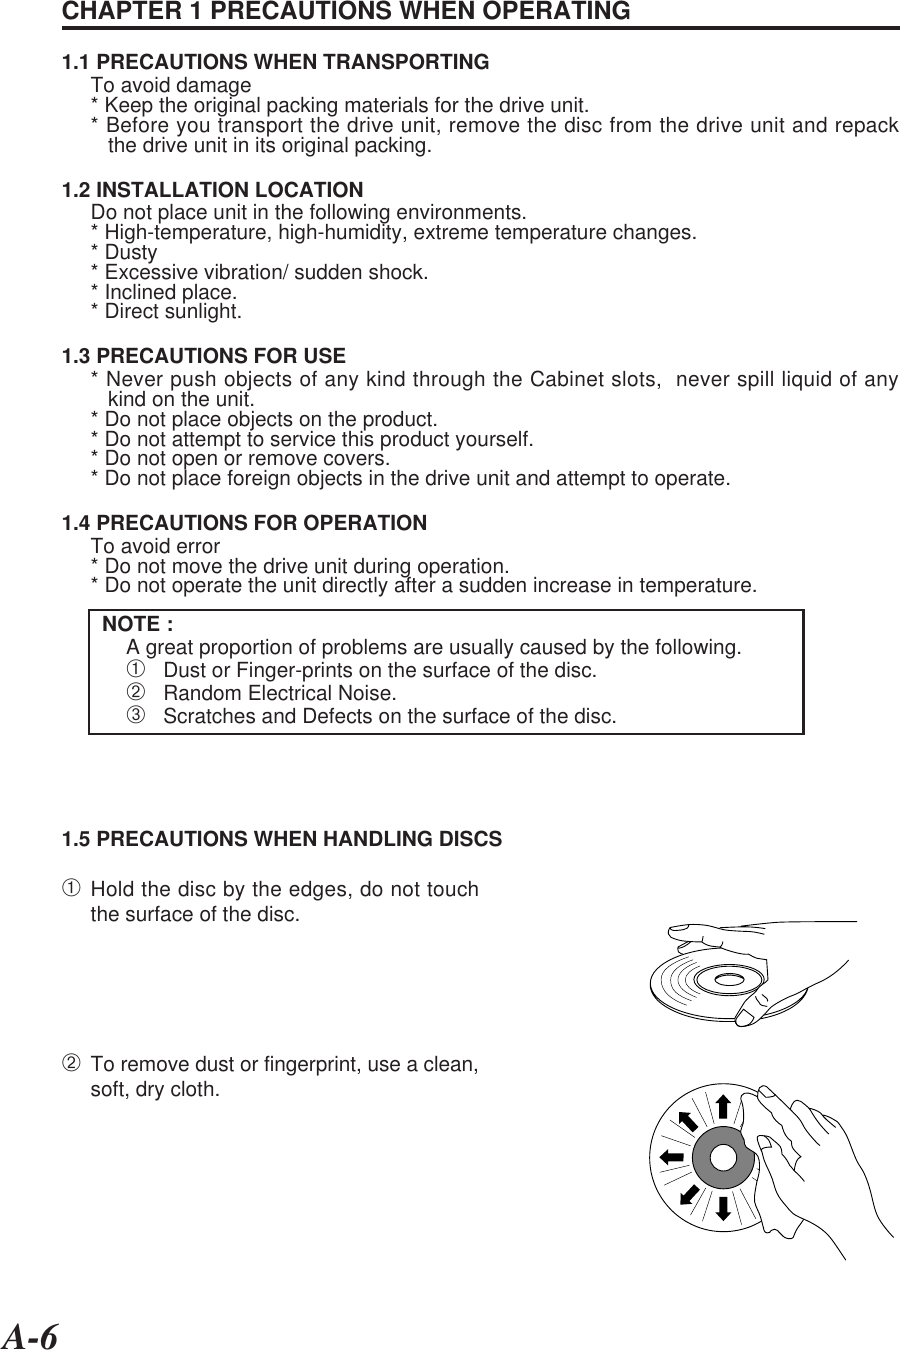 A-6CHAPTER 1 PRECAUTIONS WHEN OPERATING1.1 PRECAUTIONS WHEN TRANSPORTINGTo avoid damage* Keep the original packing materials for the drive unit.* Before you transport the drive unit, remove the disc from the drive unit and repack   the drive unit in its original packing.1.2 INSTALLATION LOCATIONDo not place unit in the following environments.* High-temperature, high-humidity, extreme temperature changes.* Dusty* Excessive vibration/ sudden shock.* Inclined place.* Direct sunlight.1.3 PRECAUTIONS FOR USE* Never push objects of any kind through the Cabinet slots,  never spill liquid of any   kind on the unit.* Do not place objects on the product.* Do not attempt to service this product yourself.* Do not open or remove covers.* Do not place foreign objects in the drive unit and attempt to operate.1.4 PRECAUTIONS FOR OPERATIONTo avoid error* Do not move the drive unit during operation.* Do not operate the unit directly after a sudden increase in temperature.NOTE :A great proportion of problems are usually caused by the following.➀   Dust or Finger-prints on the surface of the disc.➁   Random Electrical Noise.➂   Scratches and Defects on the surface of the disc.1.5 PRECAUTIONS WHEN HANDLING DISCS➀Hold the disc by the edges, do not touchthe surface of the disc.➁To remove dust or fingerprint, use a clean,soft, dry cloth.